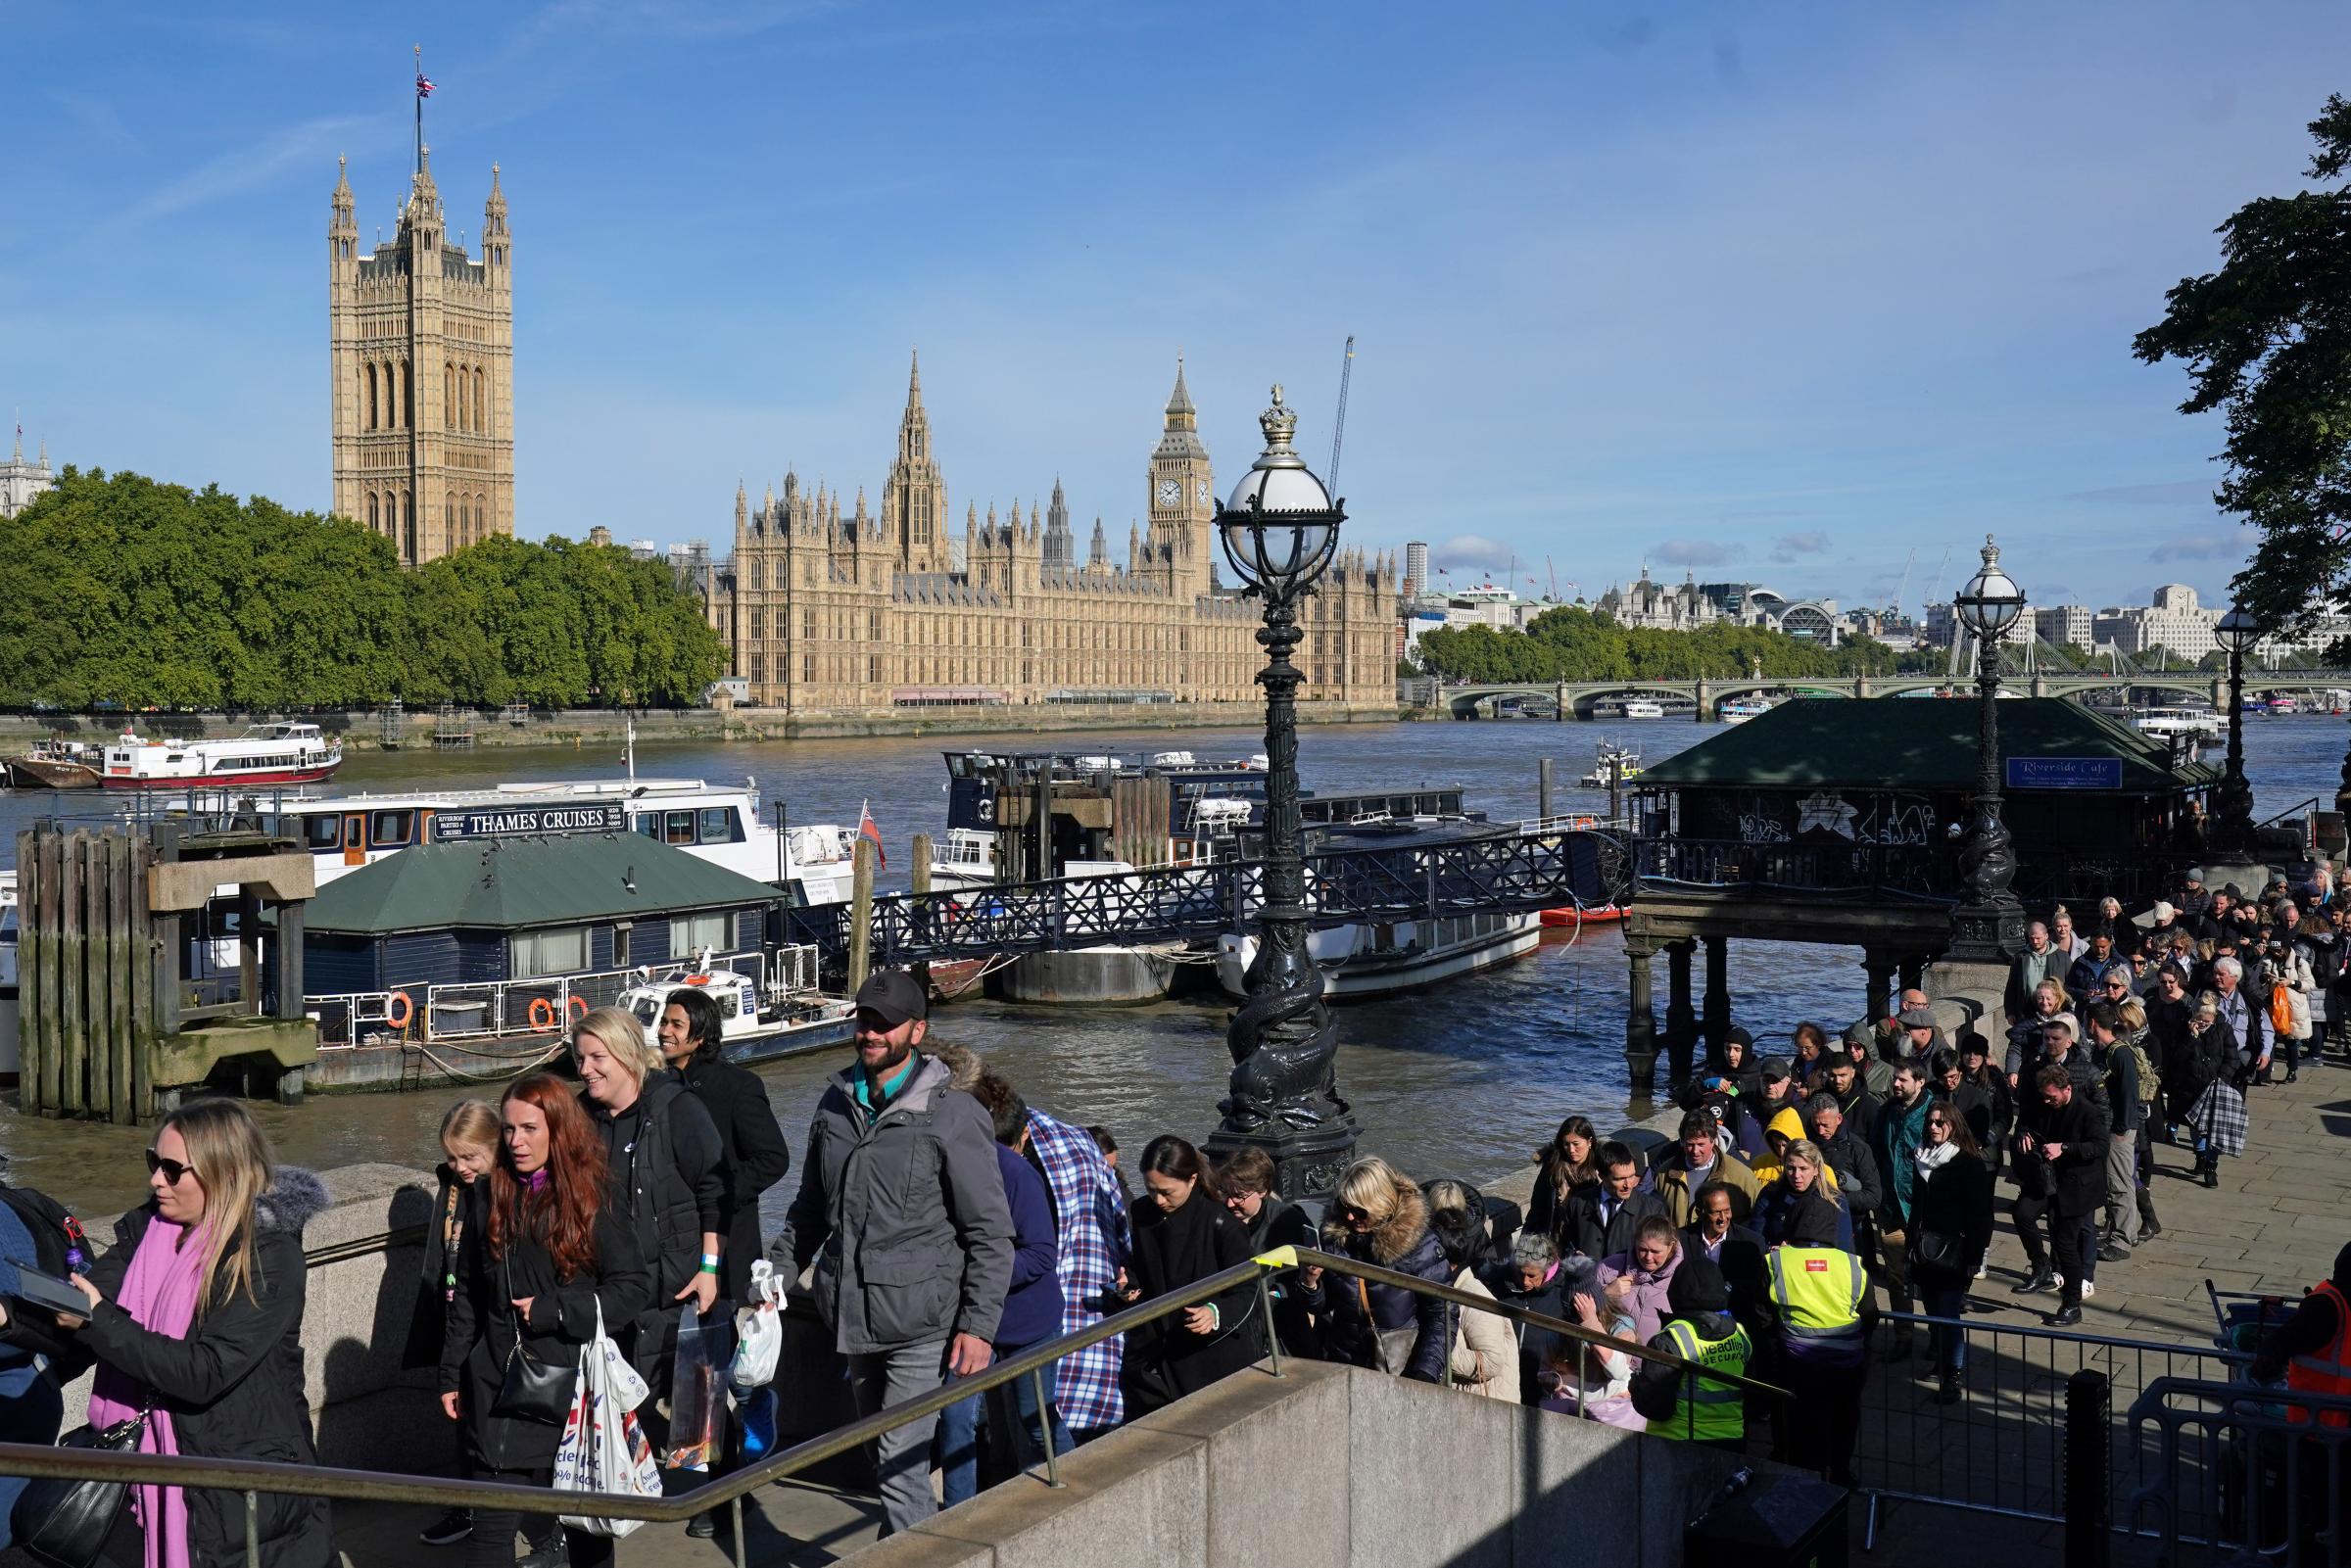 Members of the public in the queue between Westminster Bridge and Lambeth Bridge in London, as they wait to view Queen Elizabeth II lying in state ahead of her funeral on Monday. Picture date: Sunday September 18, 2022.